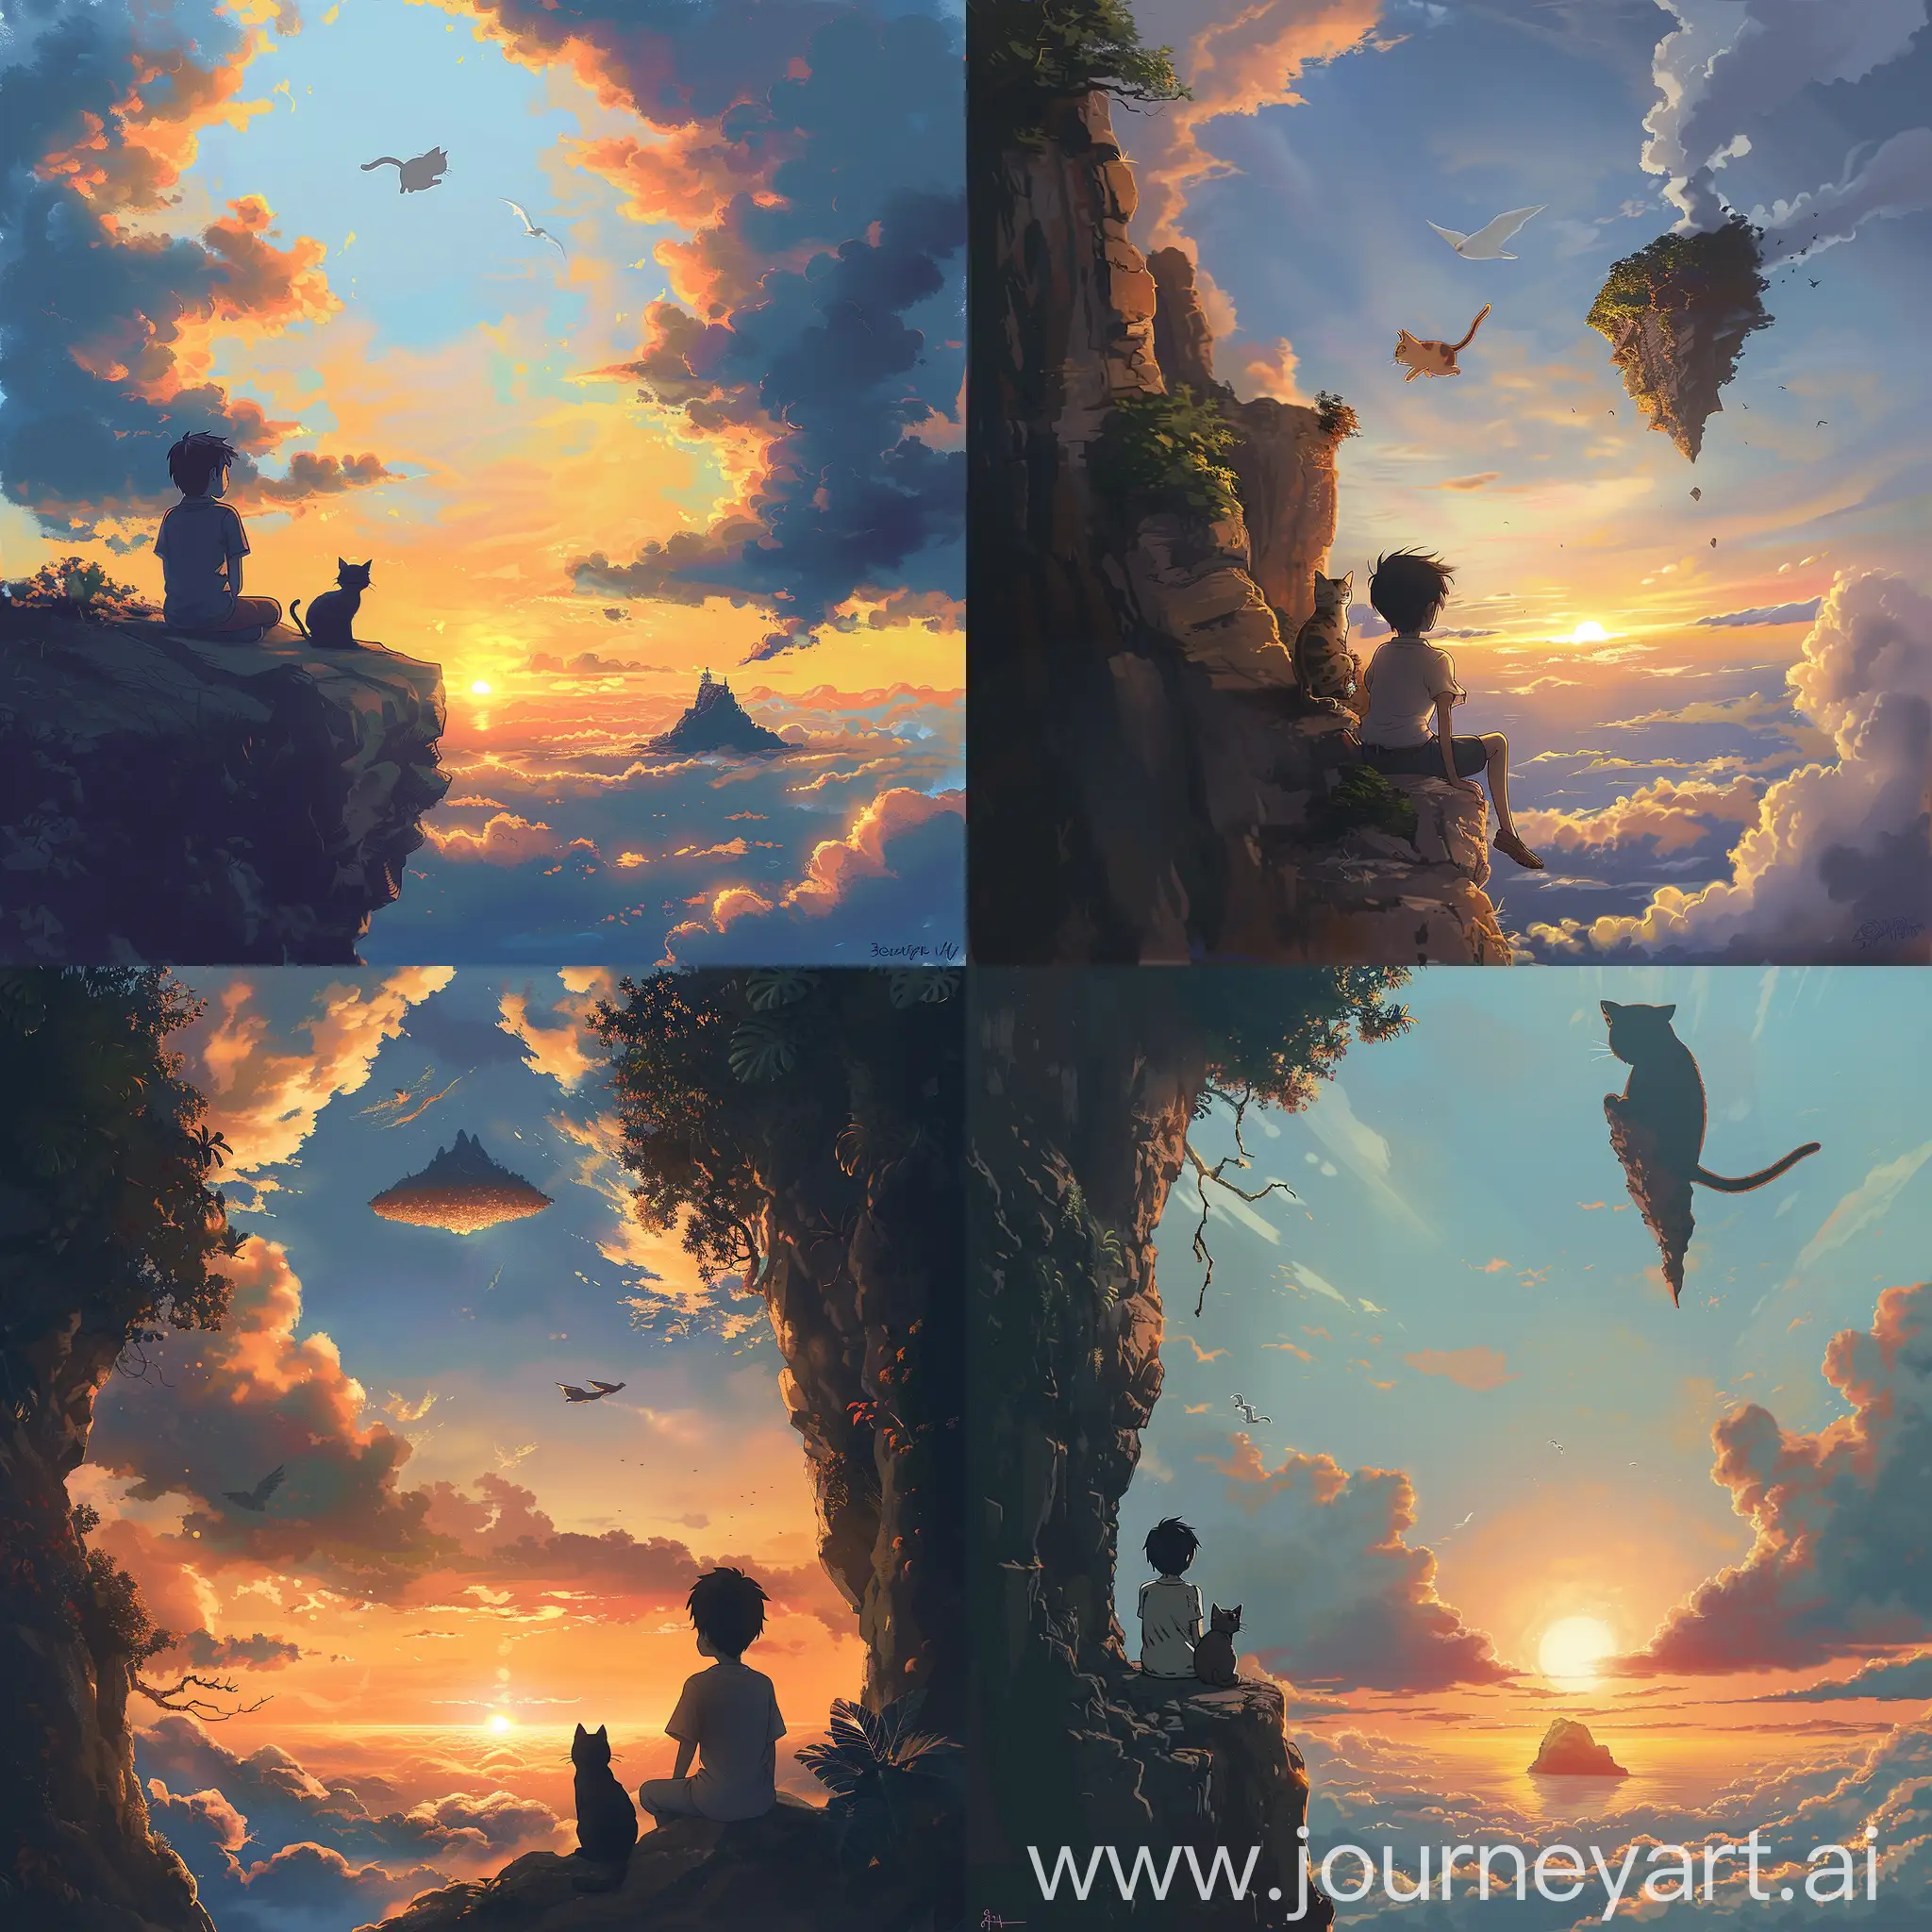 Sunset-Serenity-Boy-and-Cat-Gazing-at-Mysterious-Cloud-Island